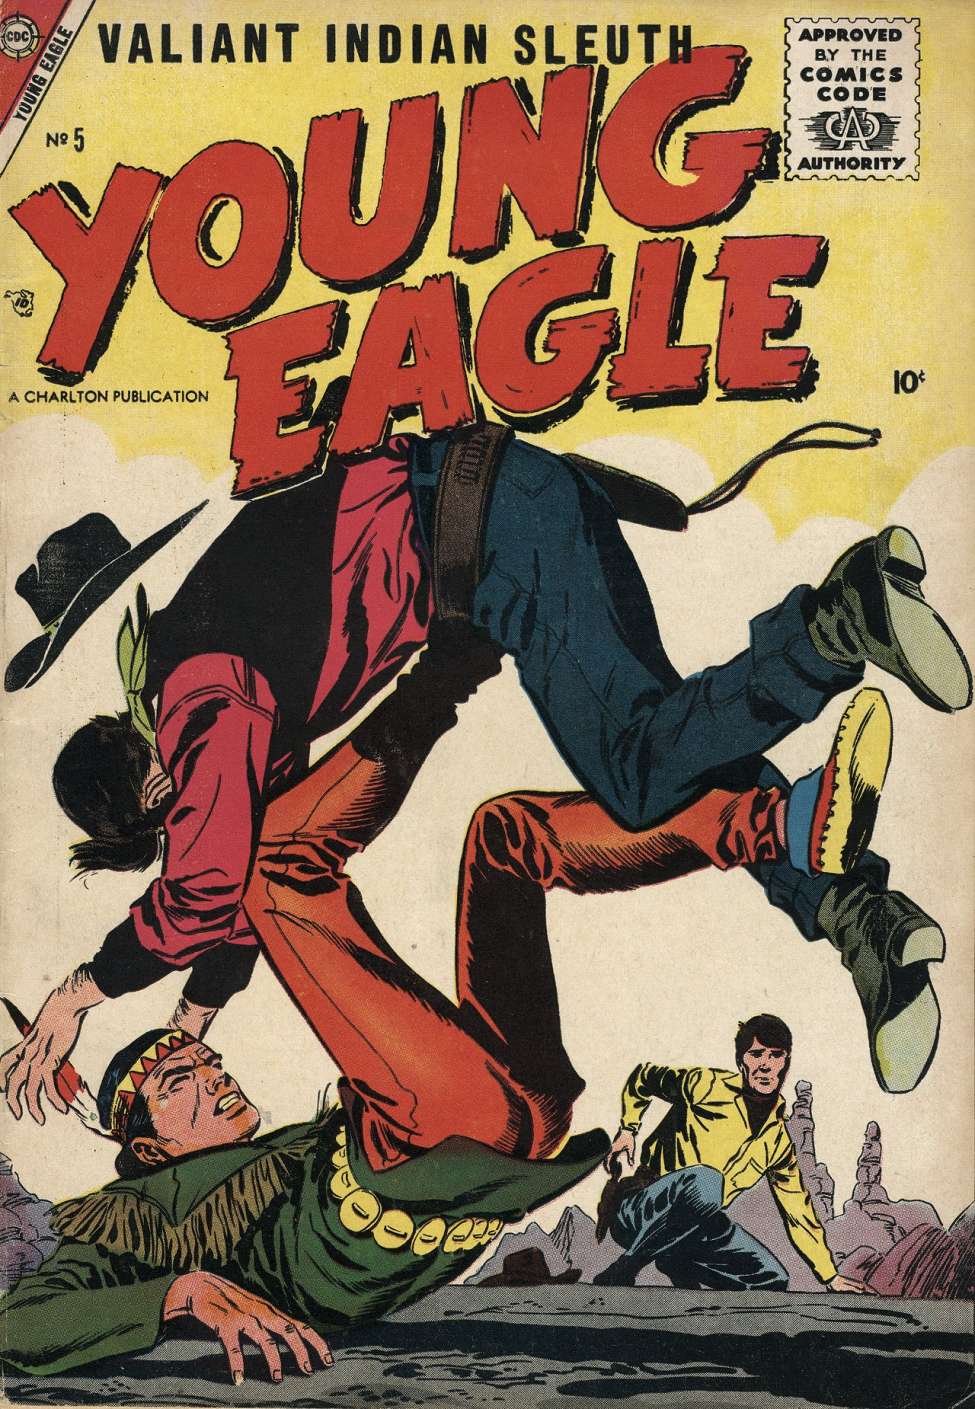 Book Cover For Young Eagle 5